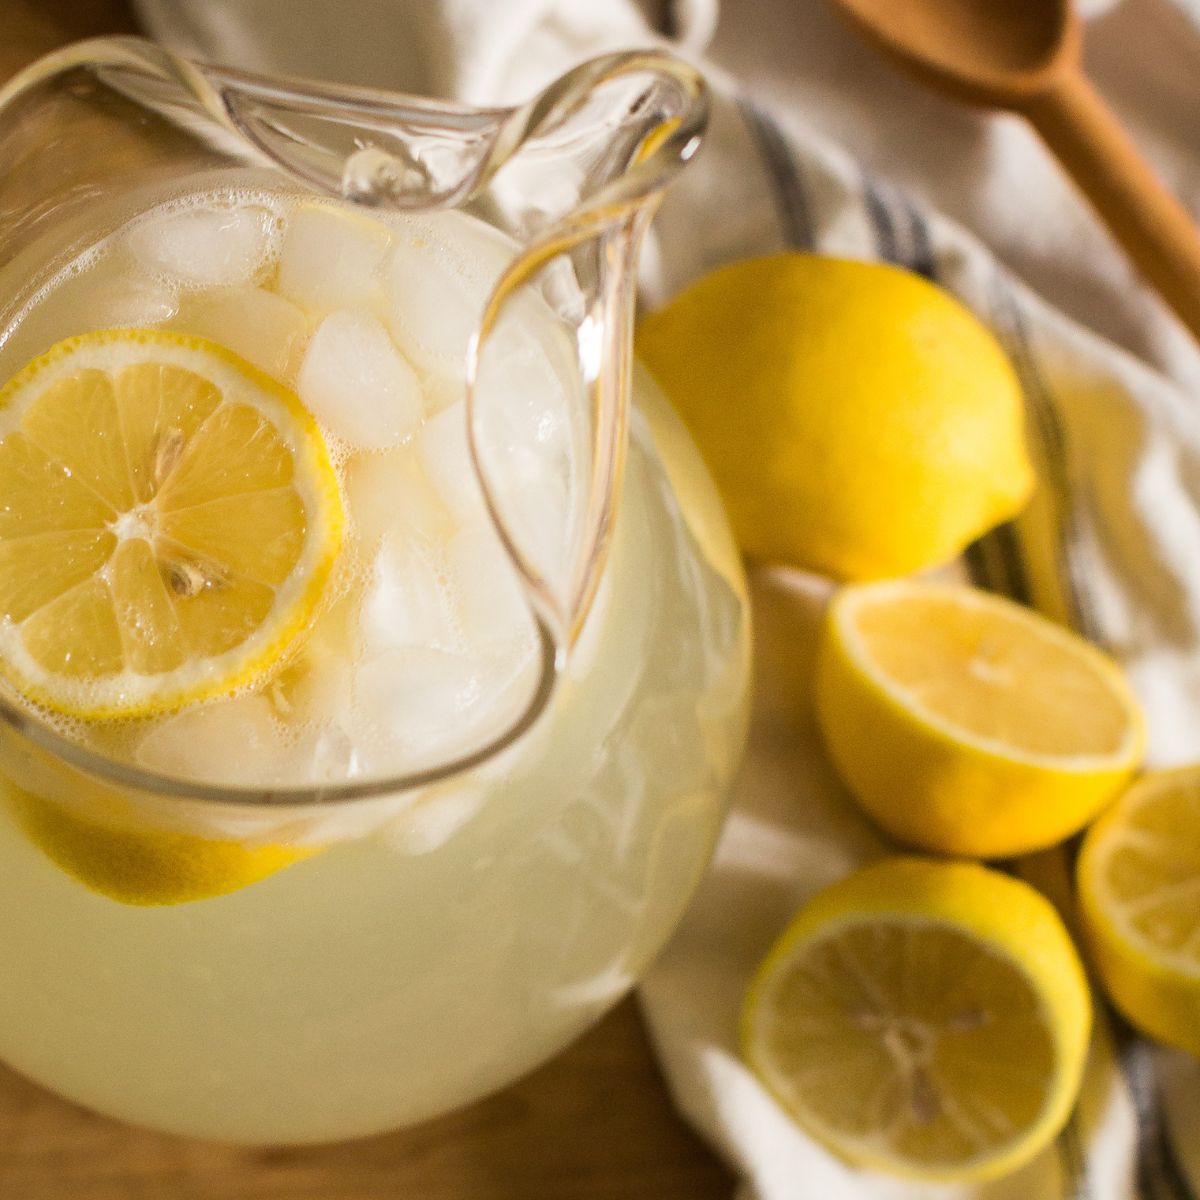 A pitcher of delicious & refreshing homemade southern sweet lemonade. Next to the pitcher is a tea towel with a wooden spoon stirrer & juicy lemons.